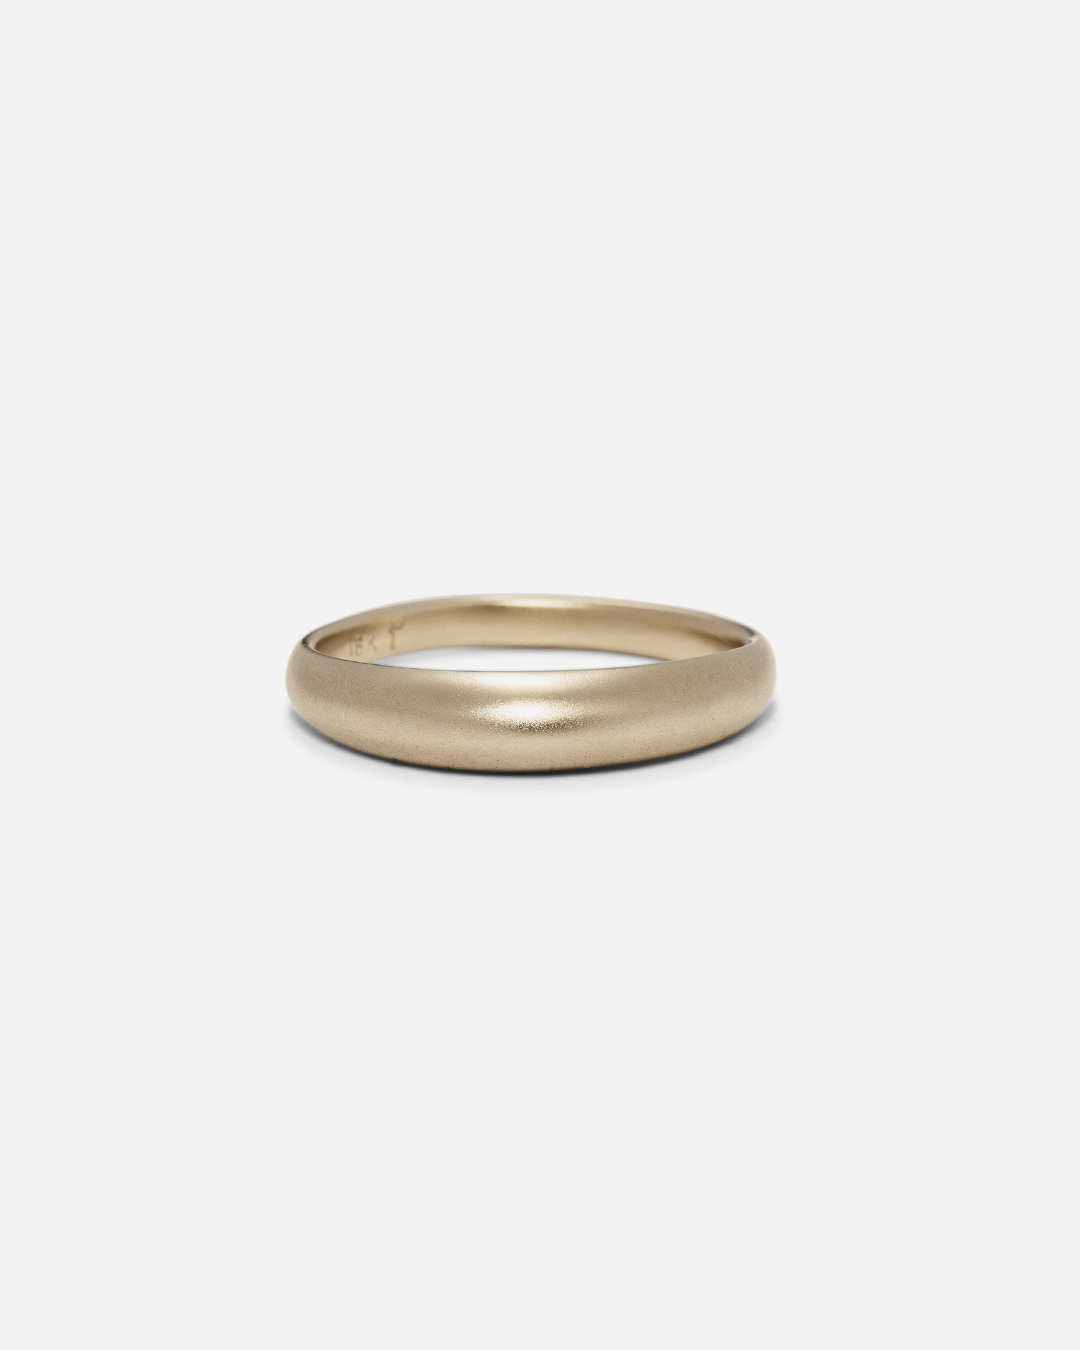 Moon Band / Small By Hiroyo in Wedding Bands Category